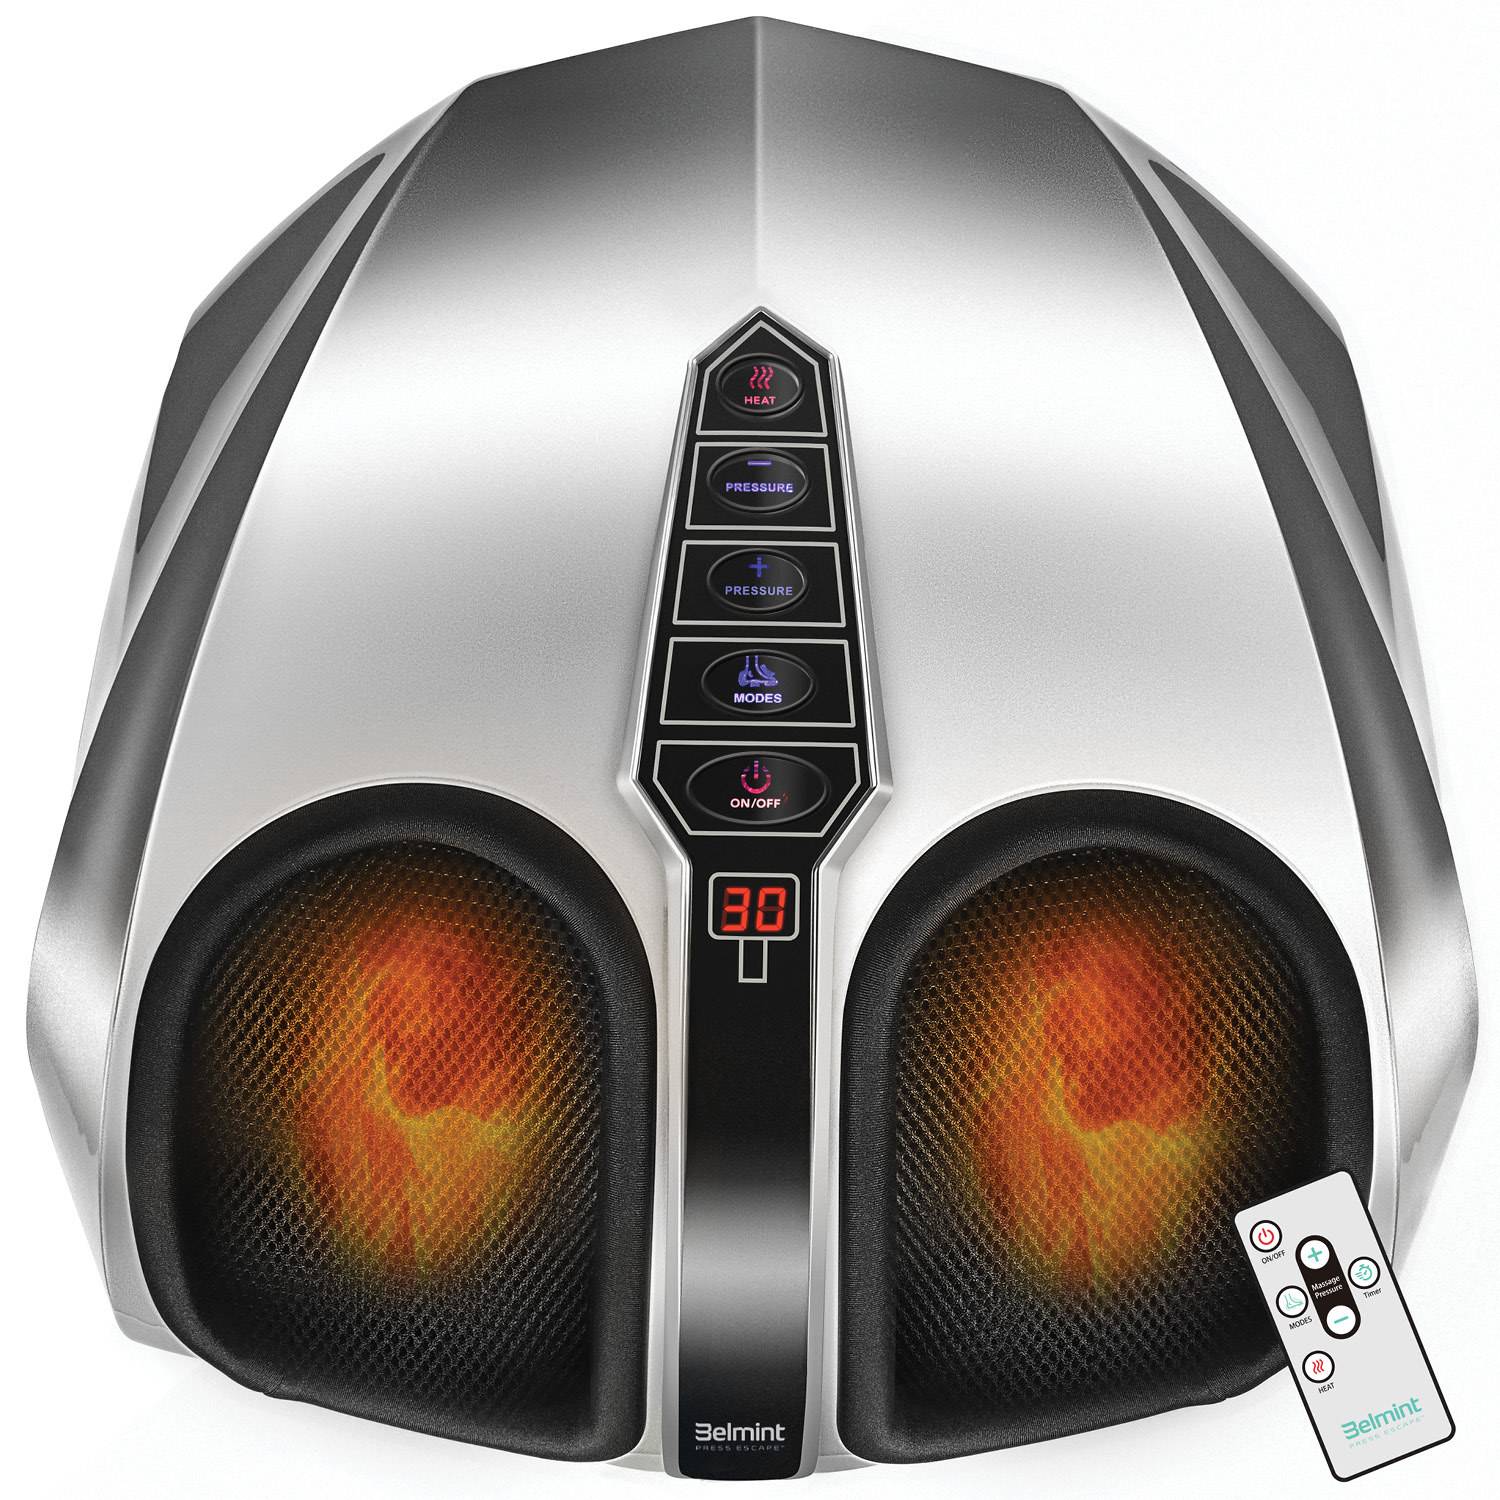 An image of a electric foot massager with five pressure settings and a heating function